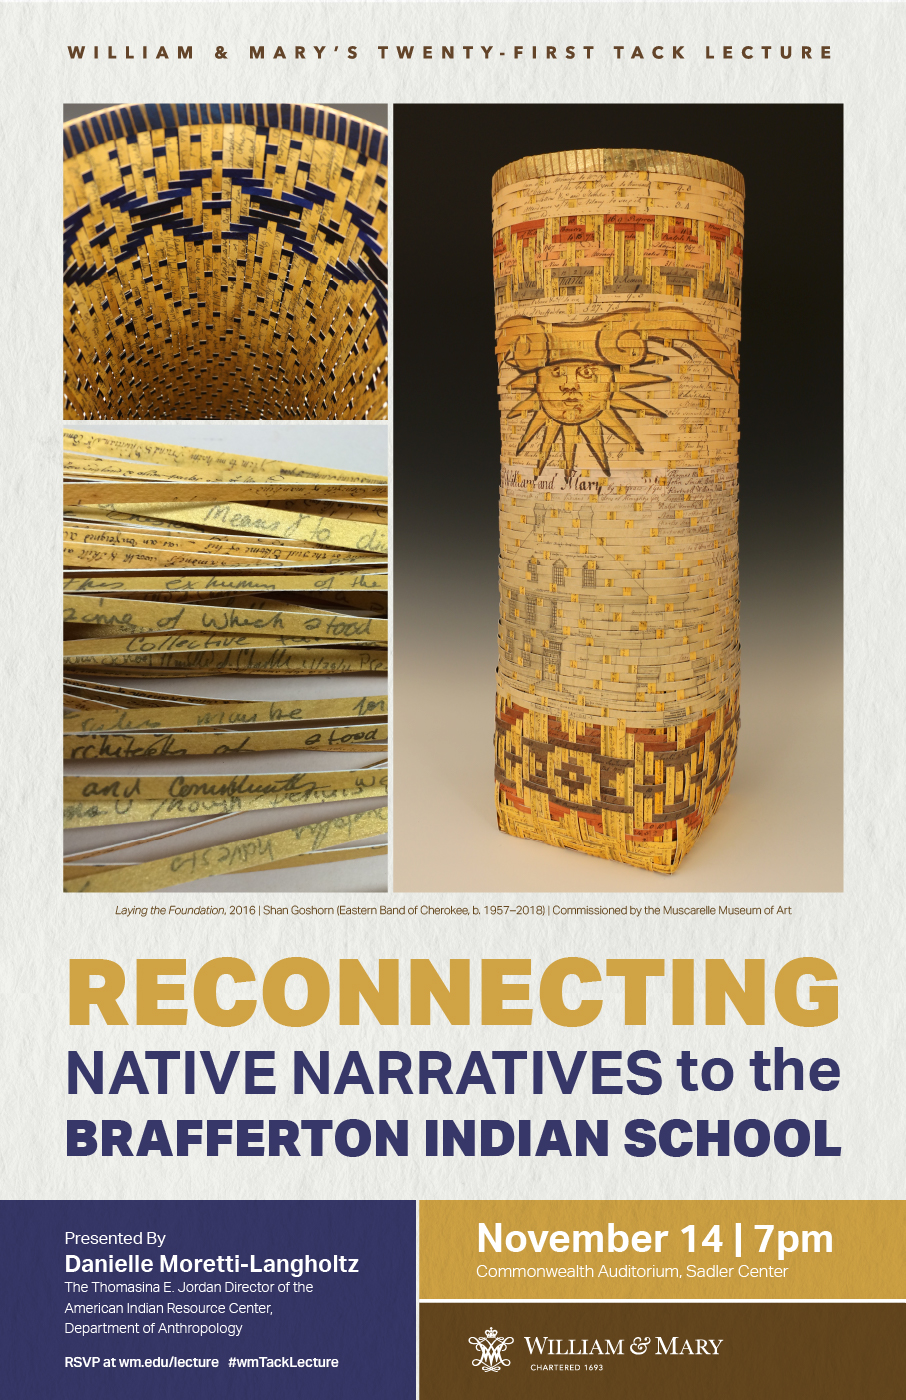 Reconnecting Native Narratives to the Brafferton Indian School